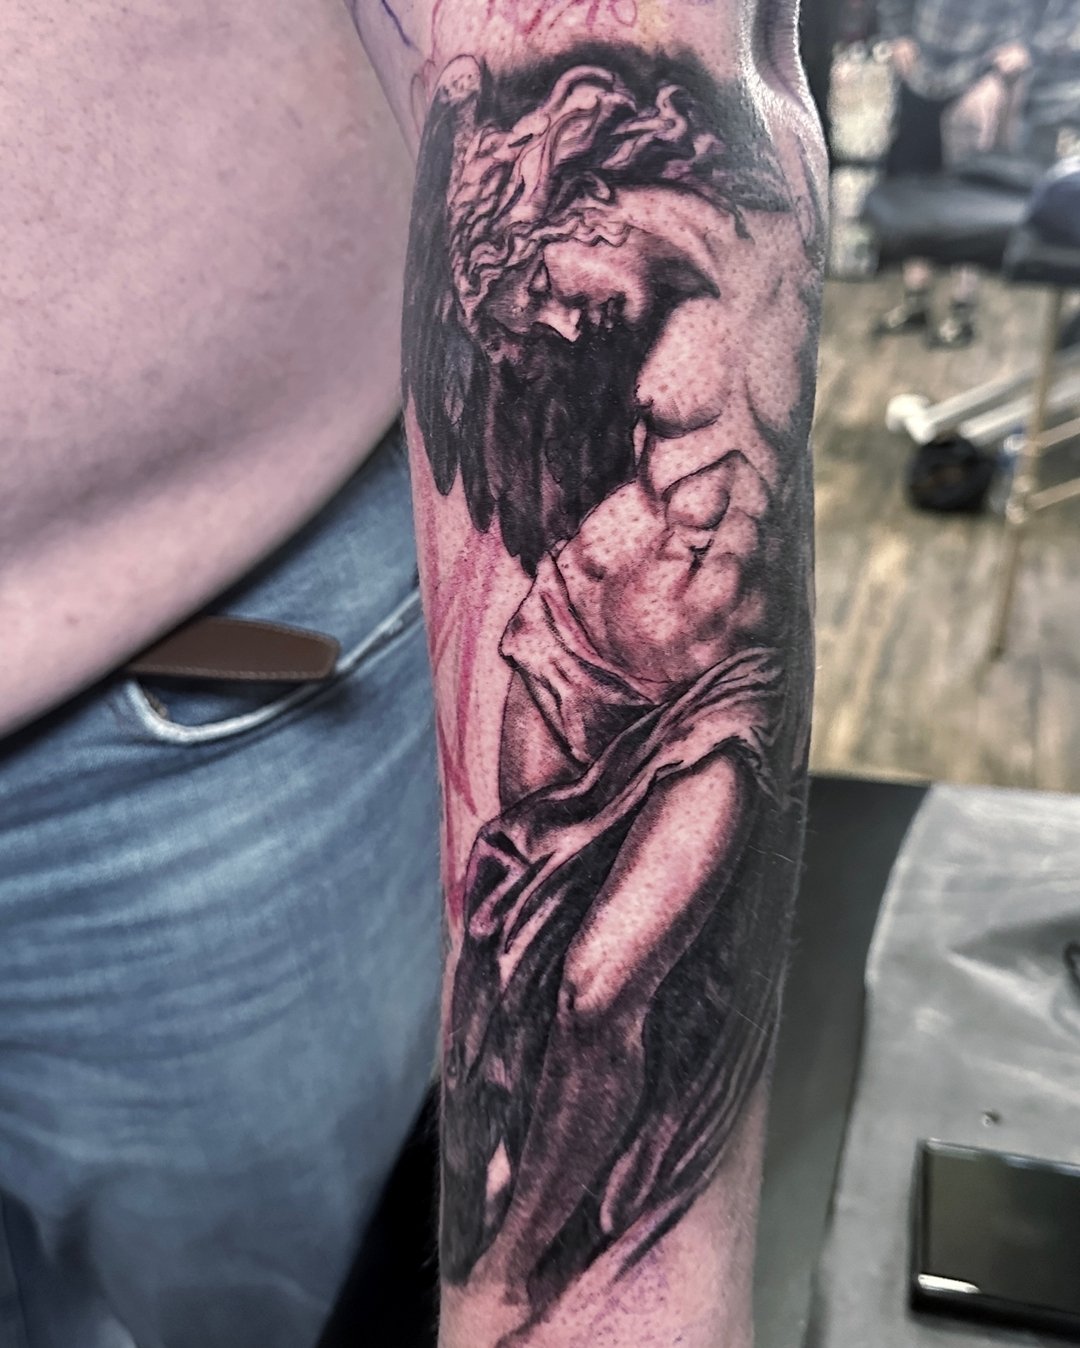 First session down on the angel sleeve. Keep your eyes peeled for more to come.